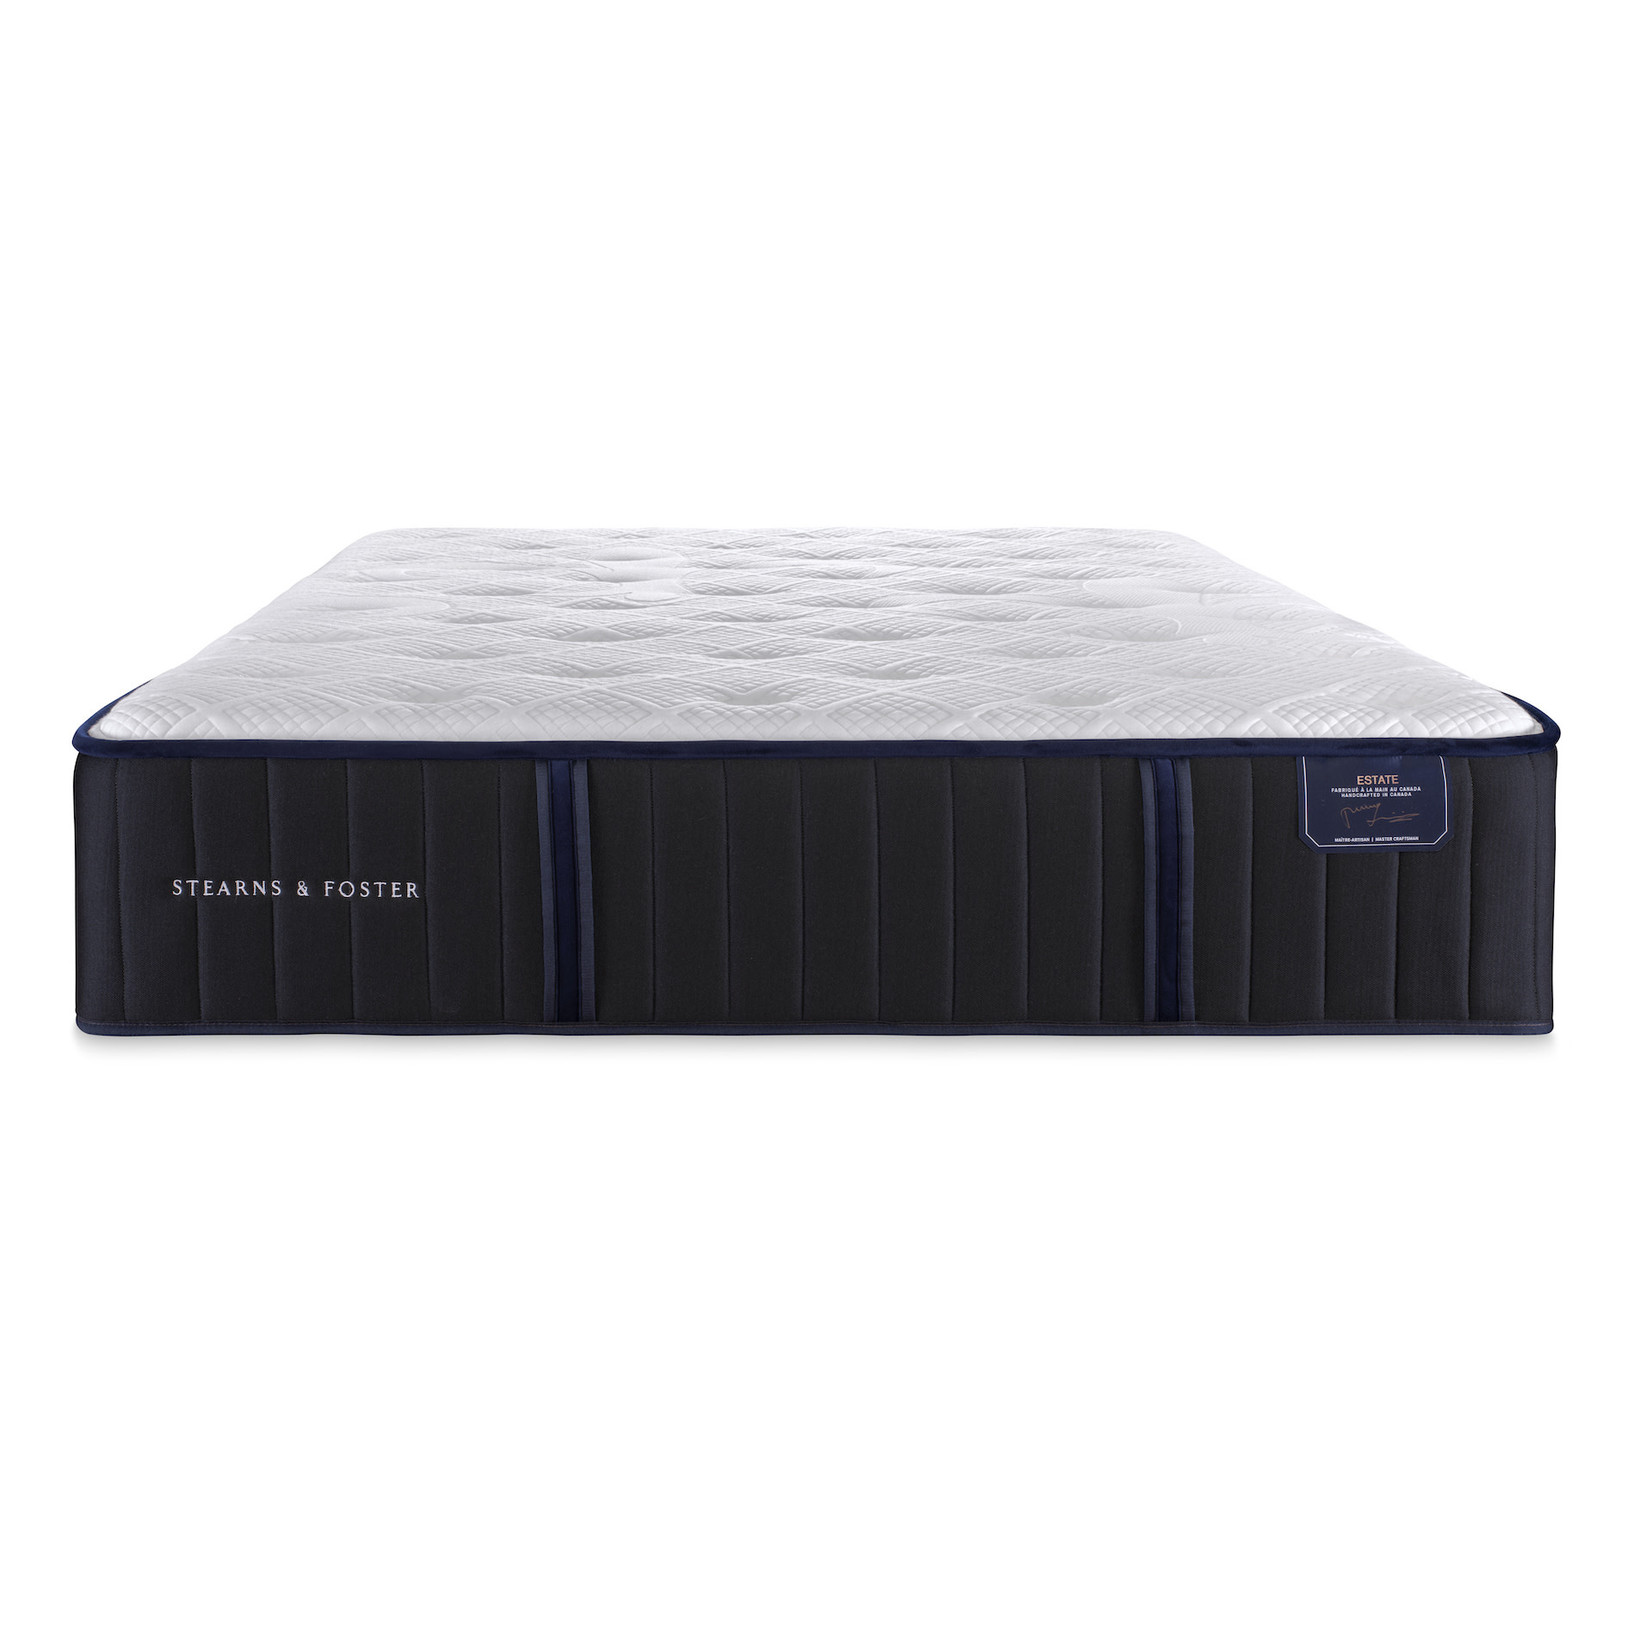 STEARN AND FOSTER AMBER SHORE S&F MATTRESS